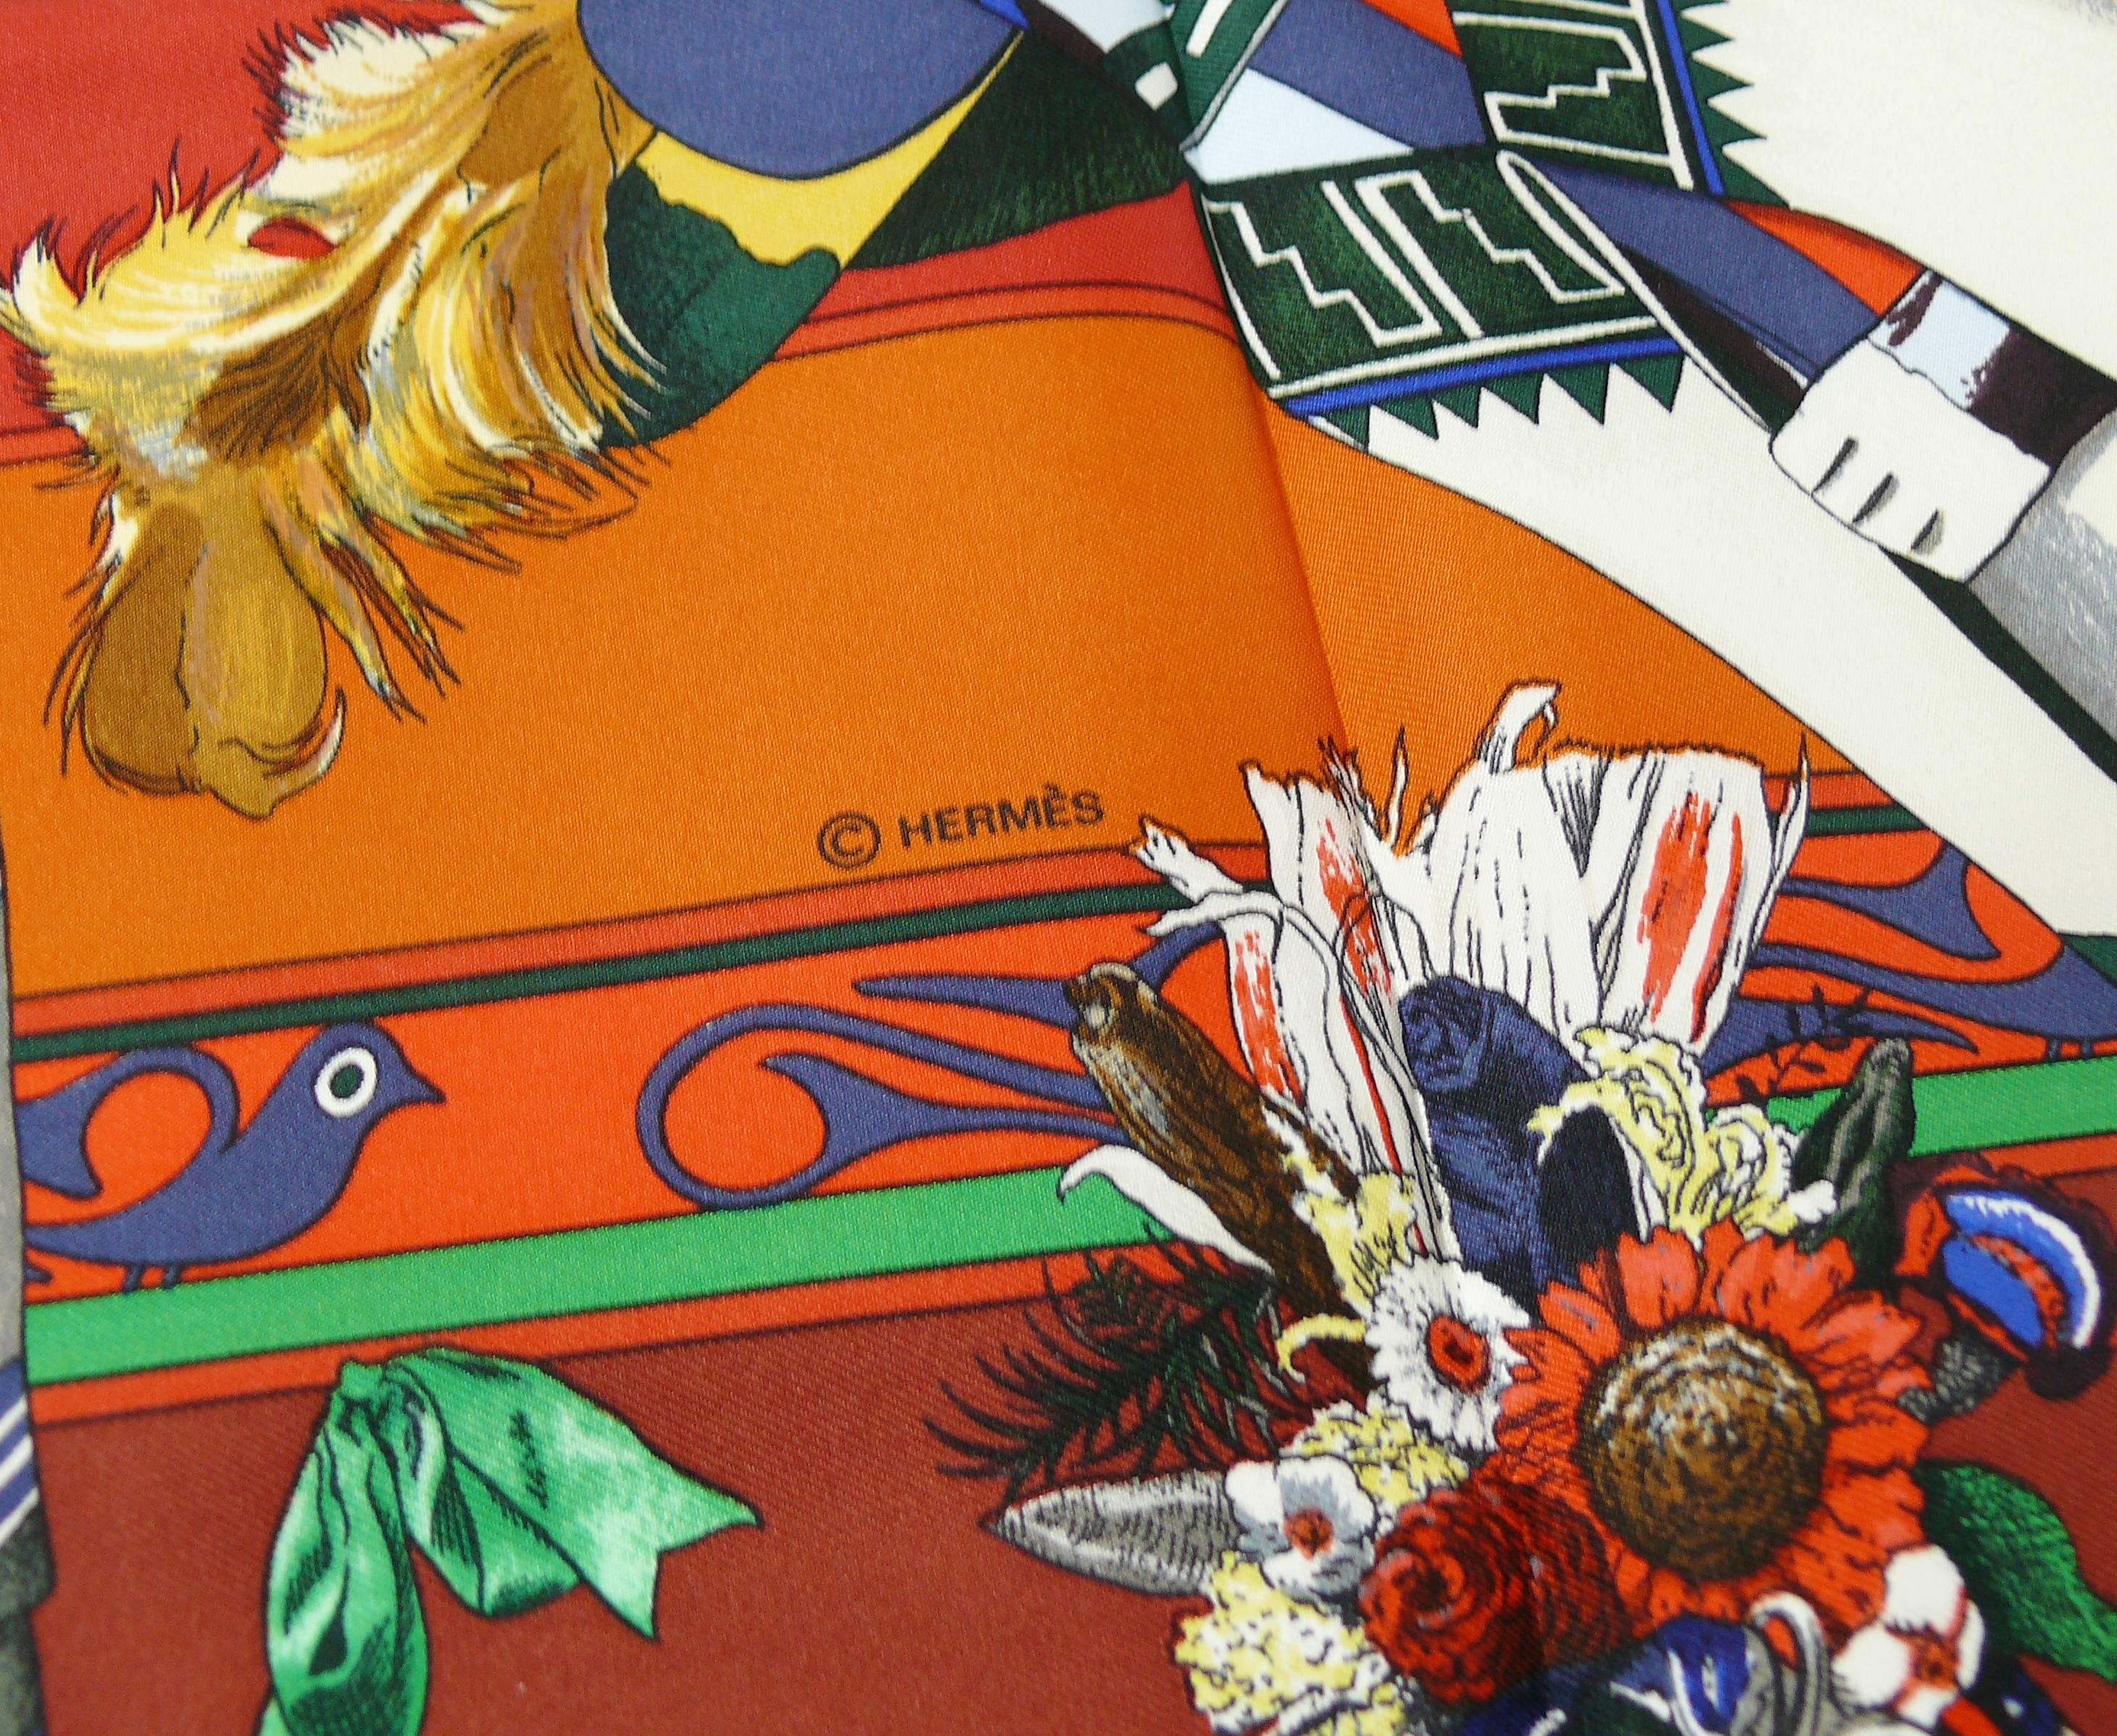 Women's Hermes Vintage Rare Iconic Silk Carre Scarf Kachinas by Kermit Oliver